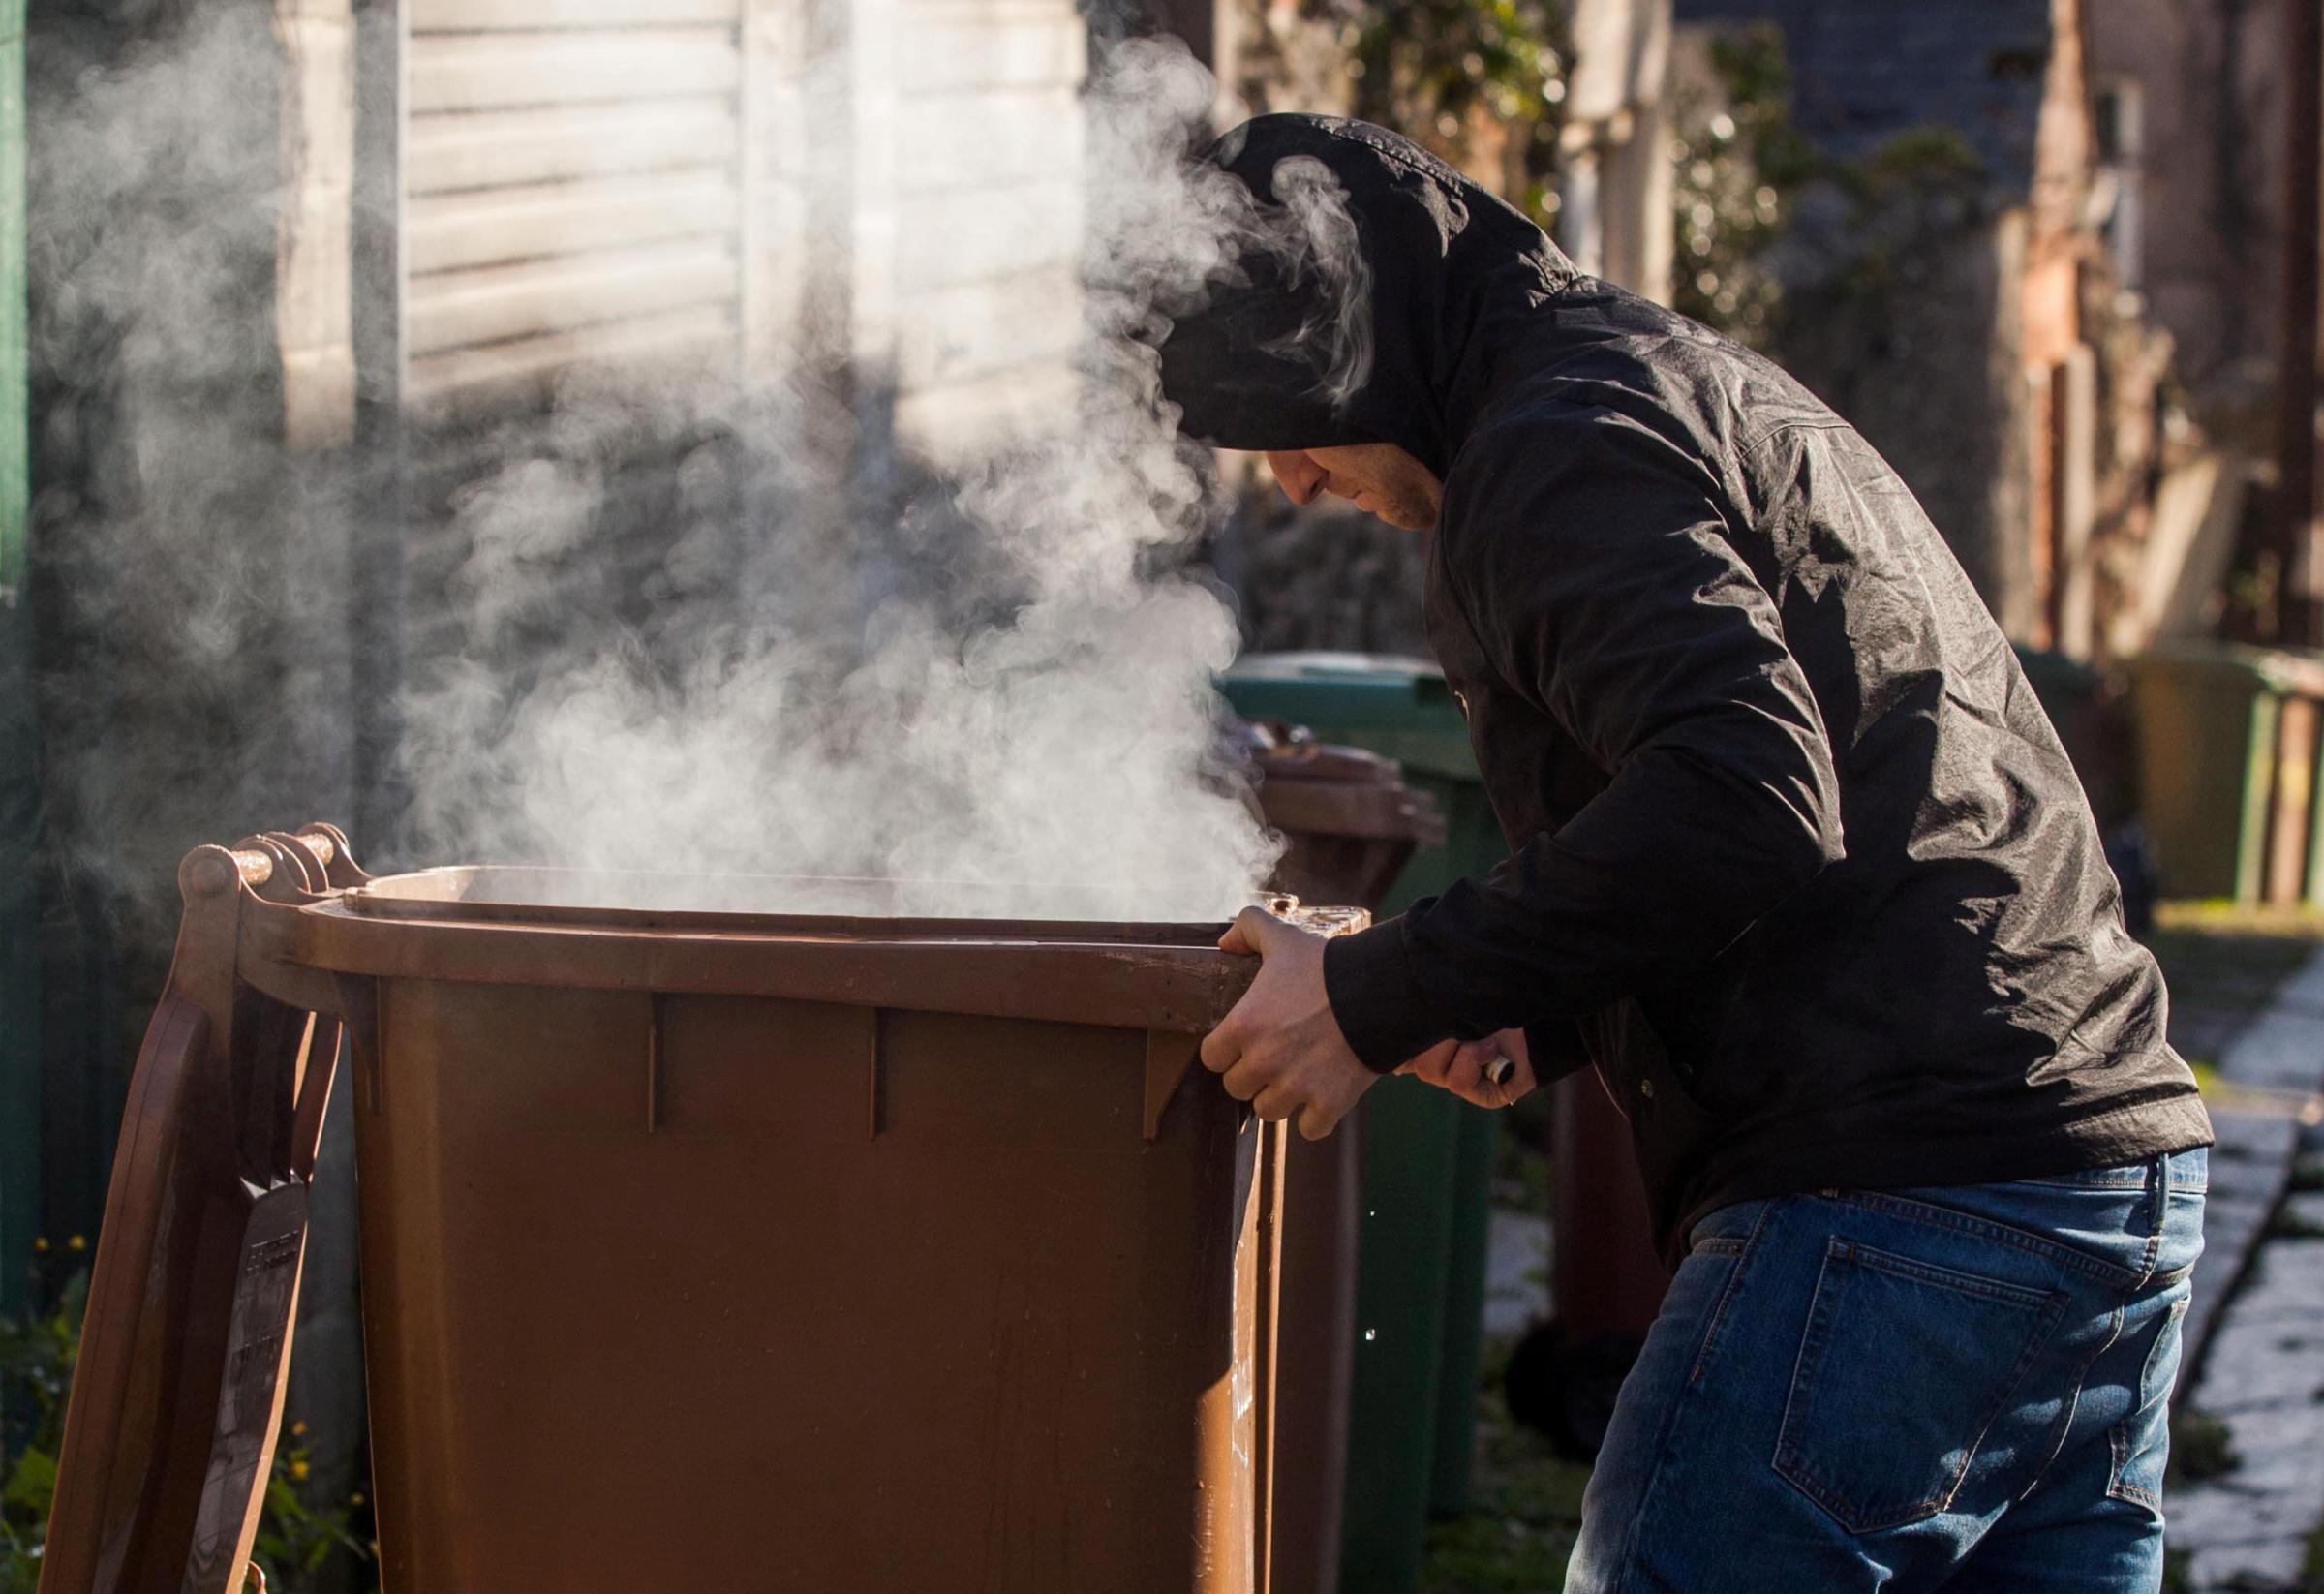 You're wheelie stupid: 'Idiot' kids getting high off fumes from burning bins